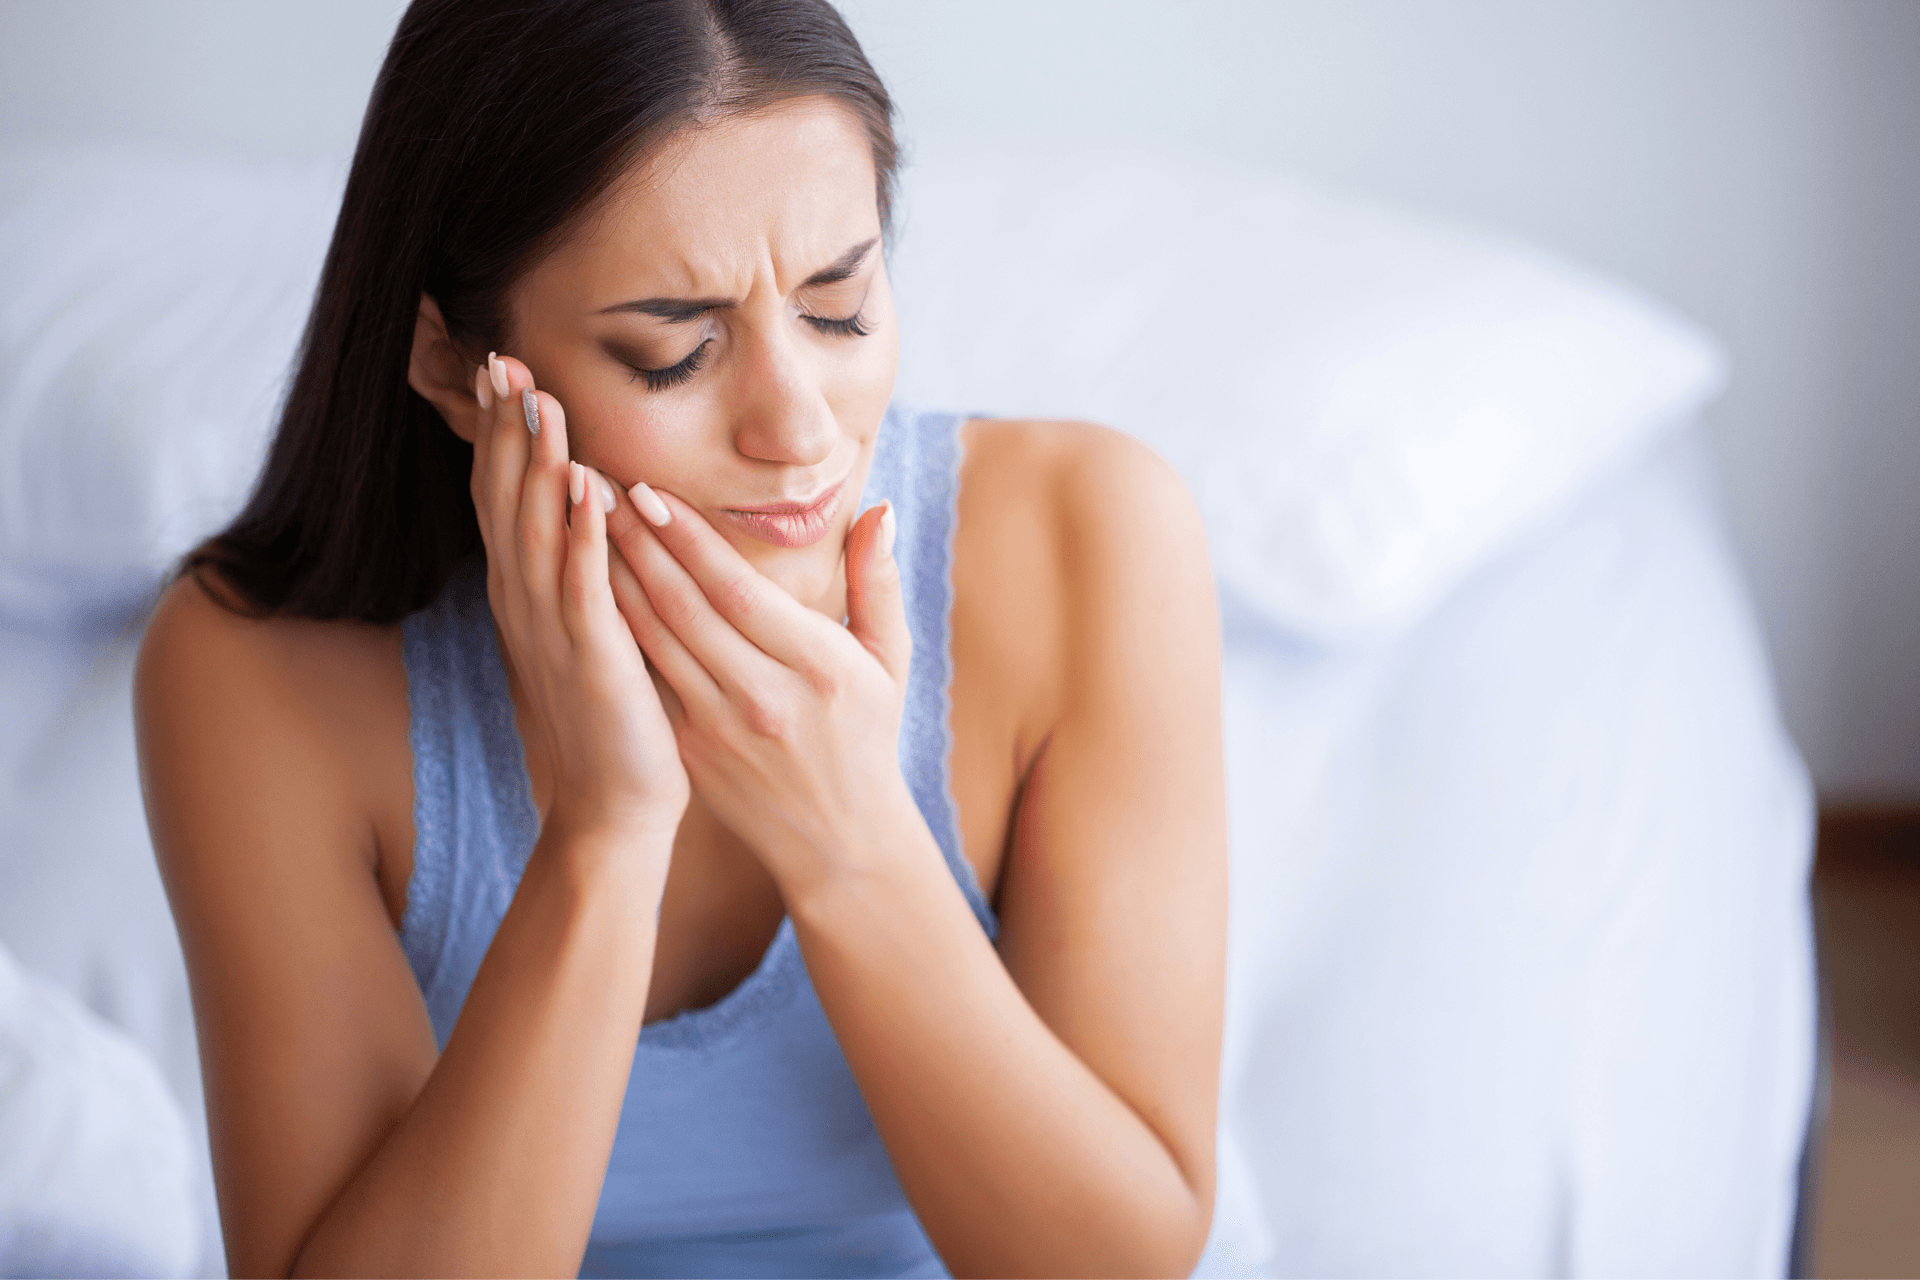 woman holding mouth | Same day emergency dentist in Escondido CA 92026